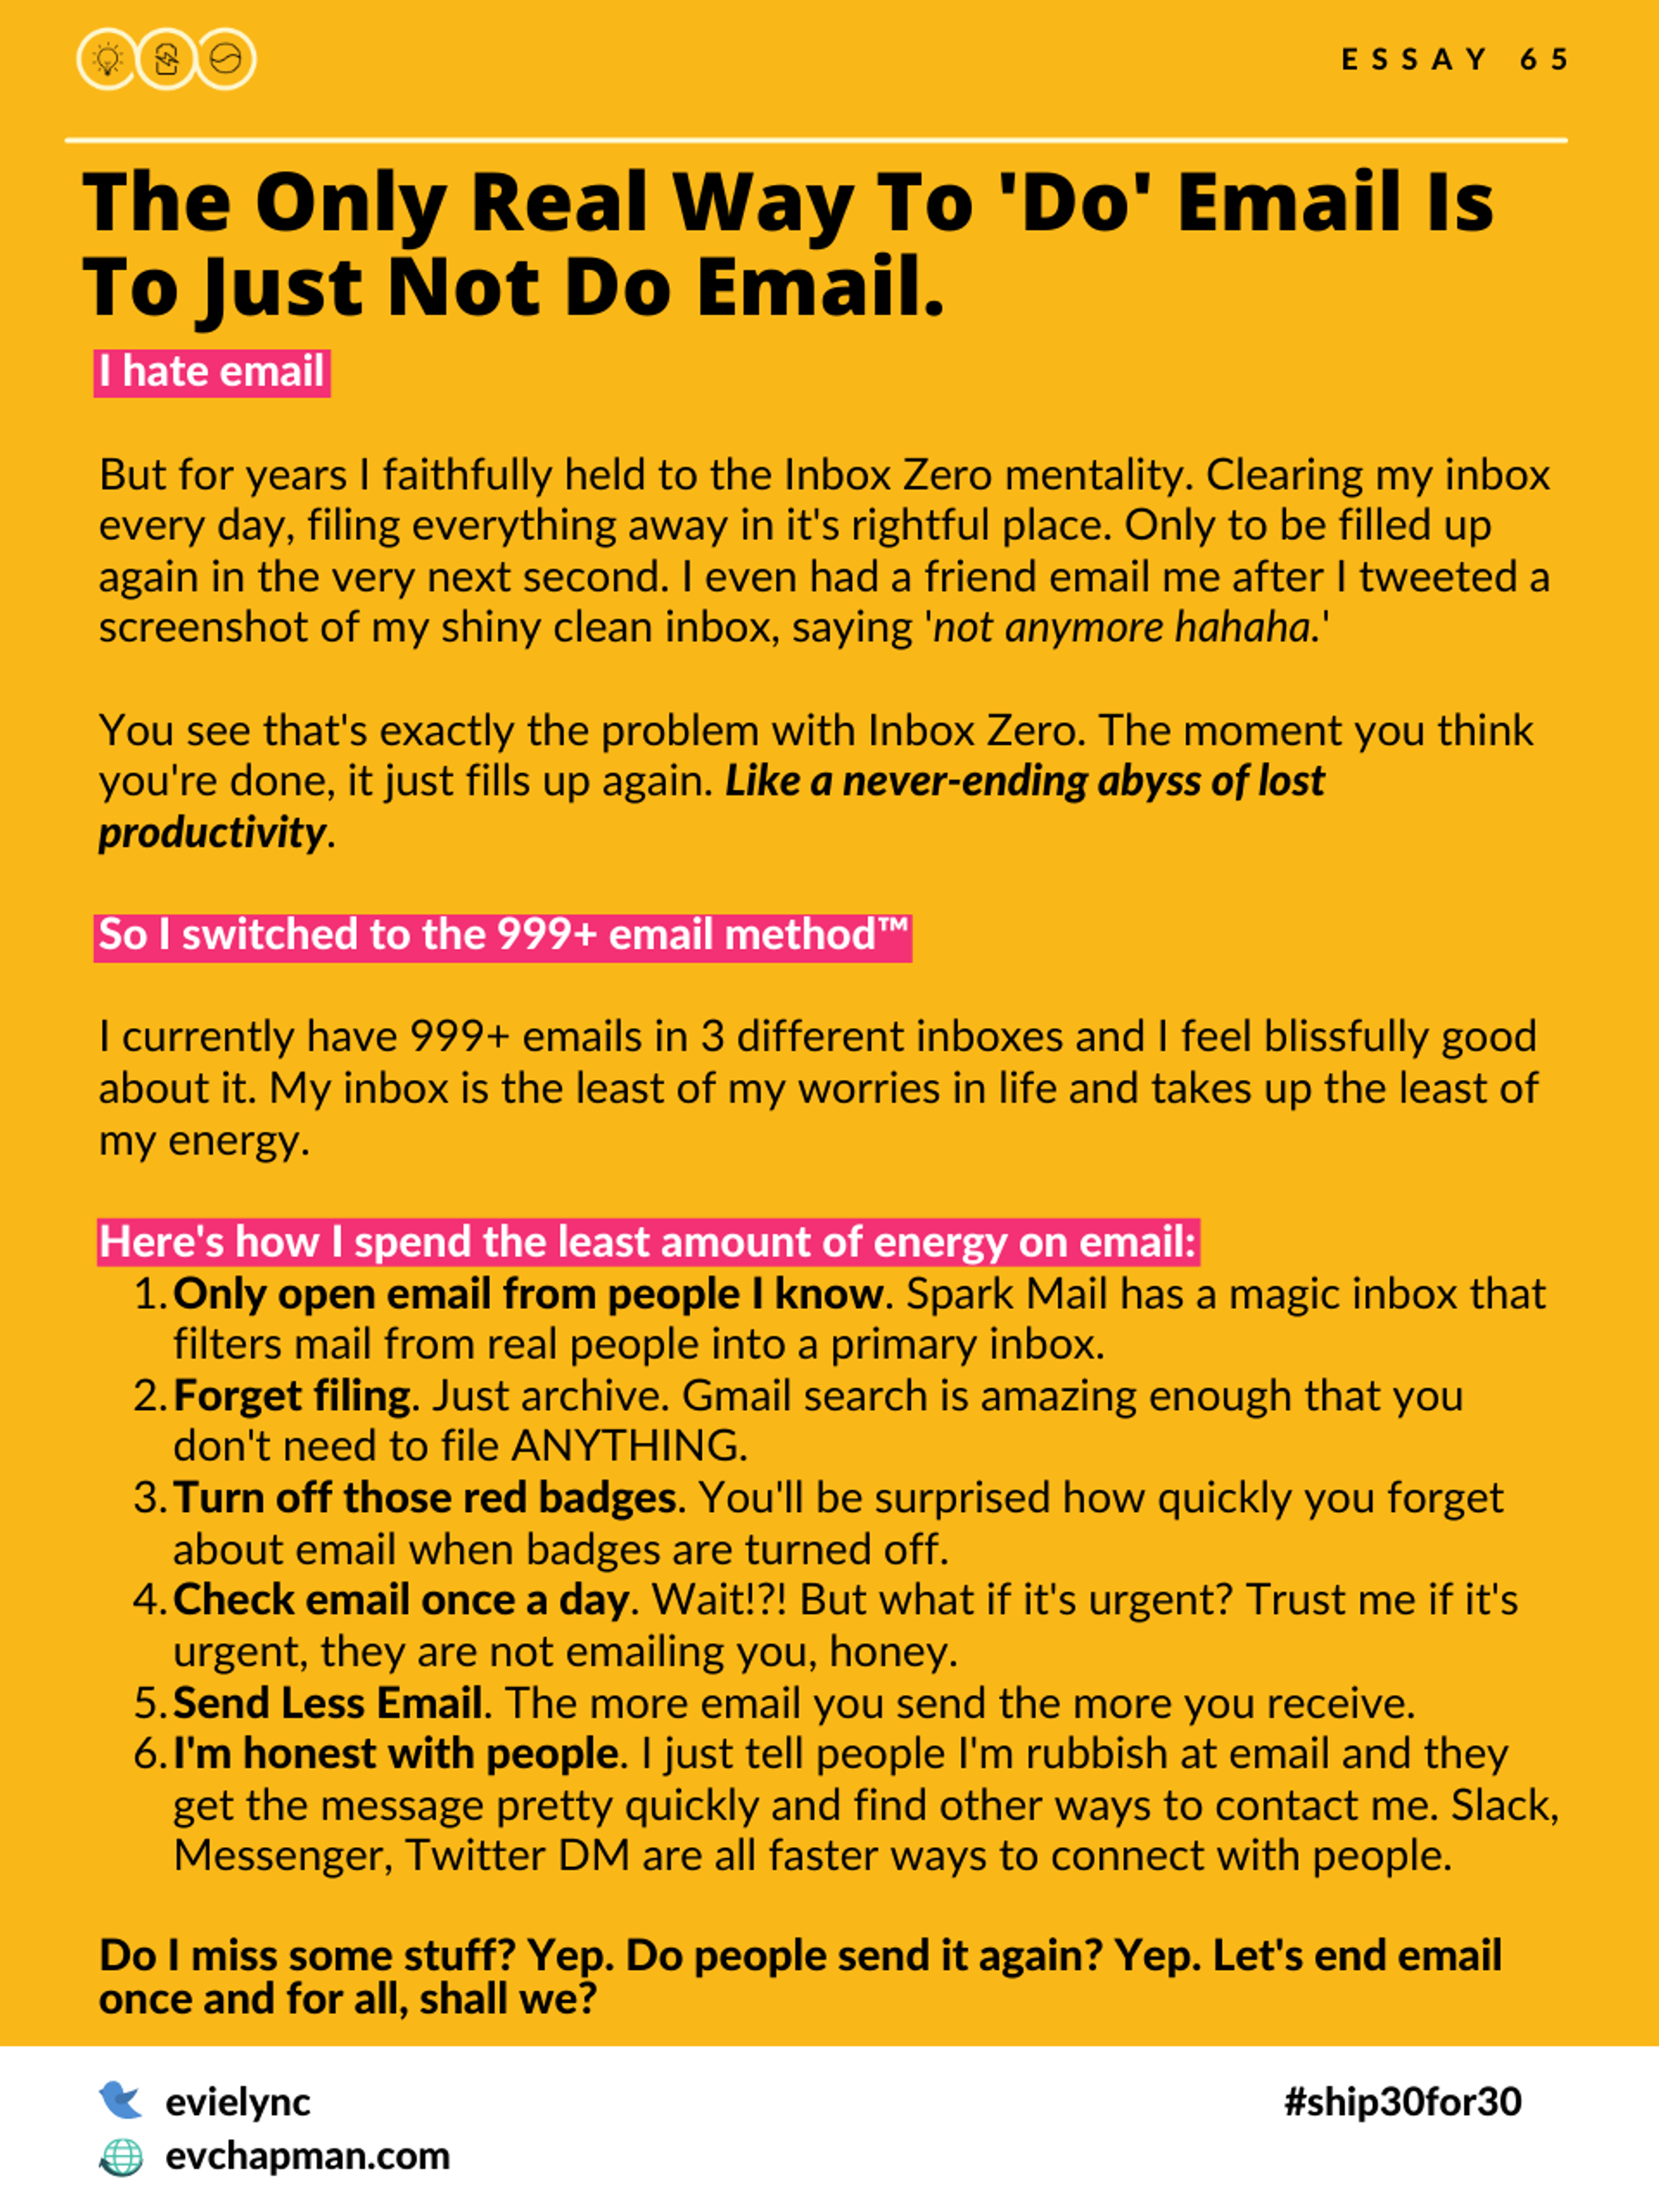 The Only Real Way To 'DO' Email Is To Just Not Do Email